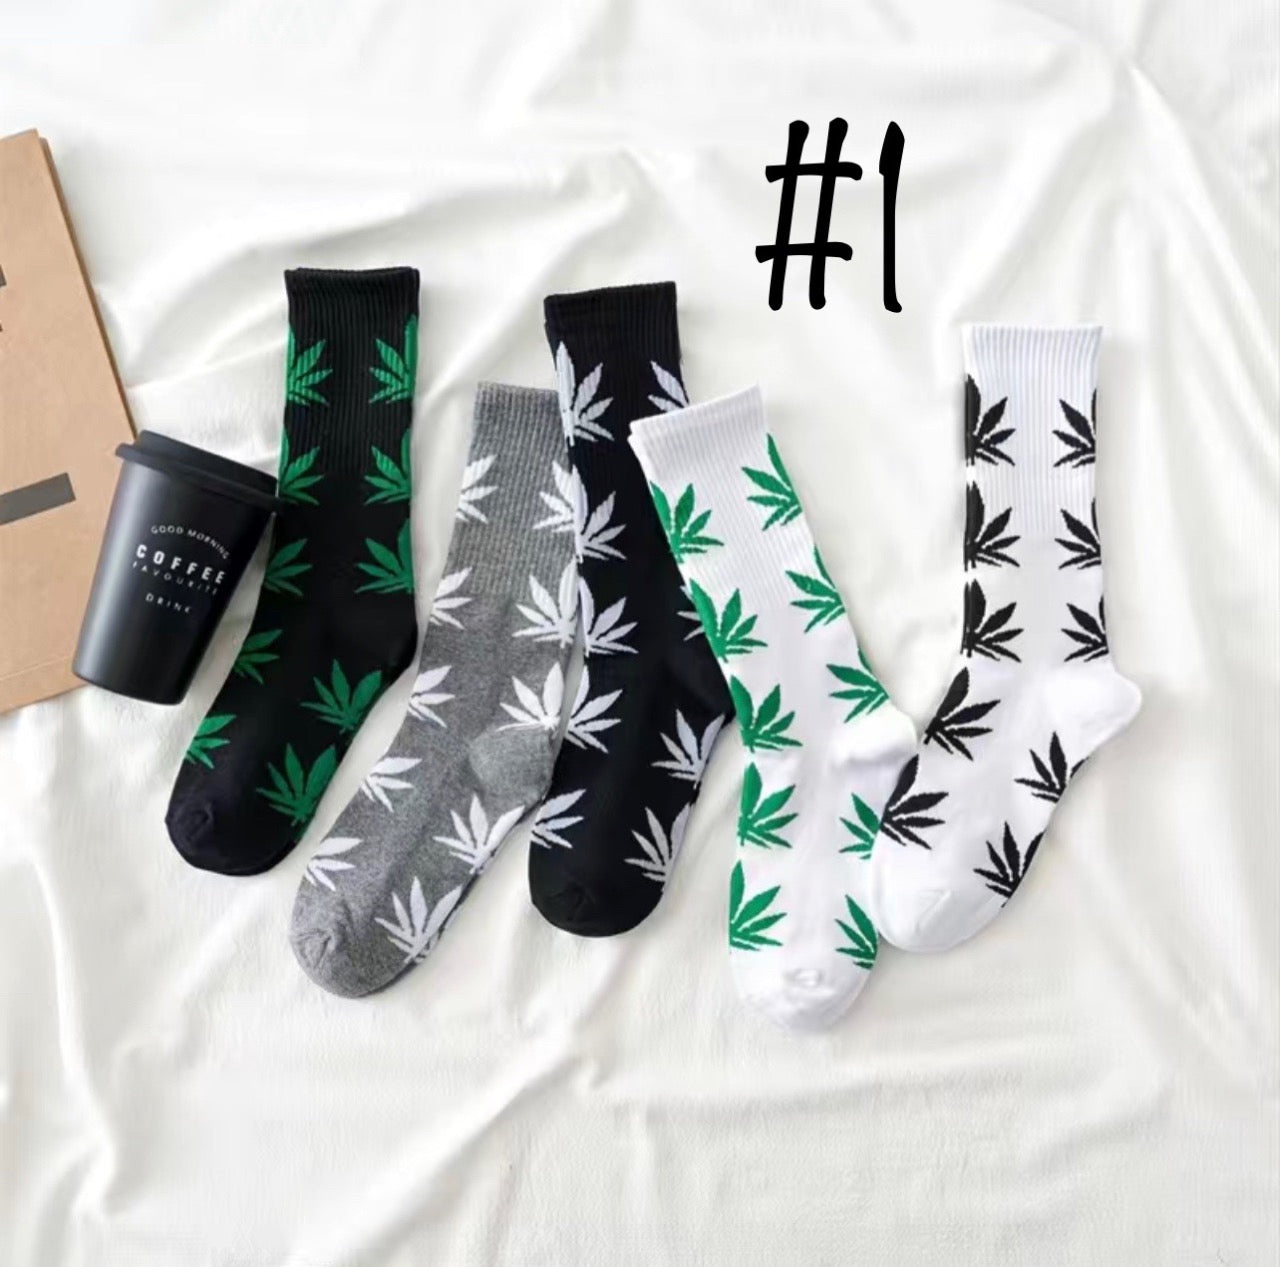 A set of six men's crew socks in sizes 6-10 with cannabis leaf patterns